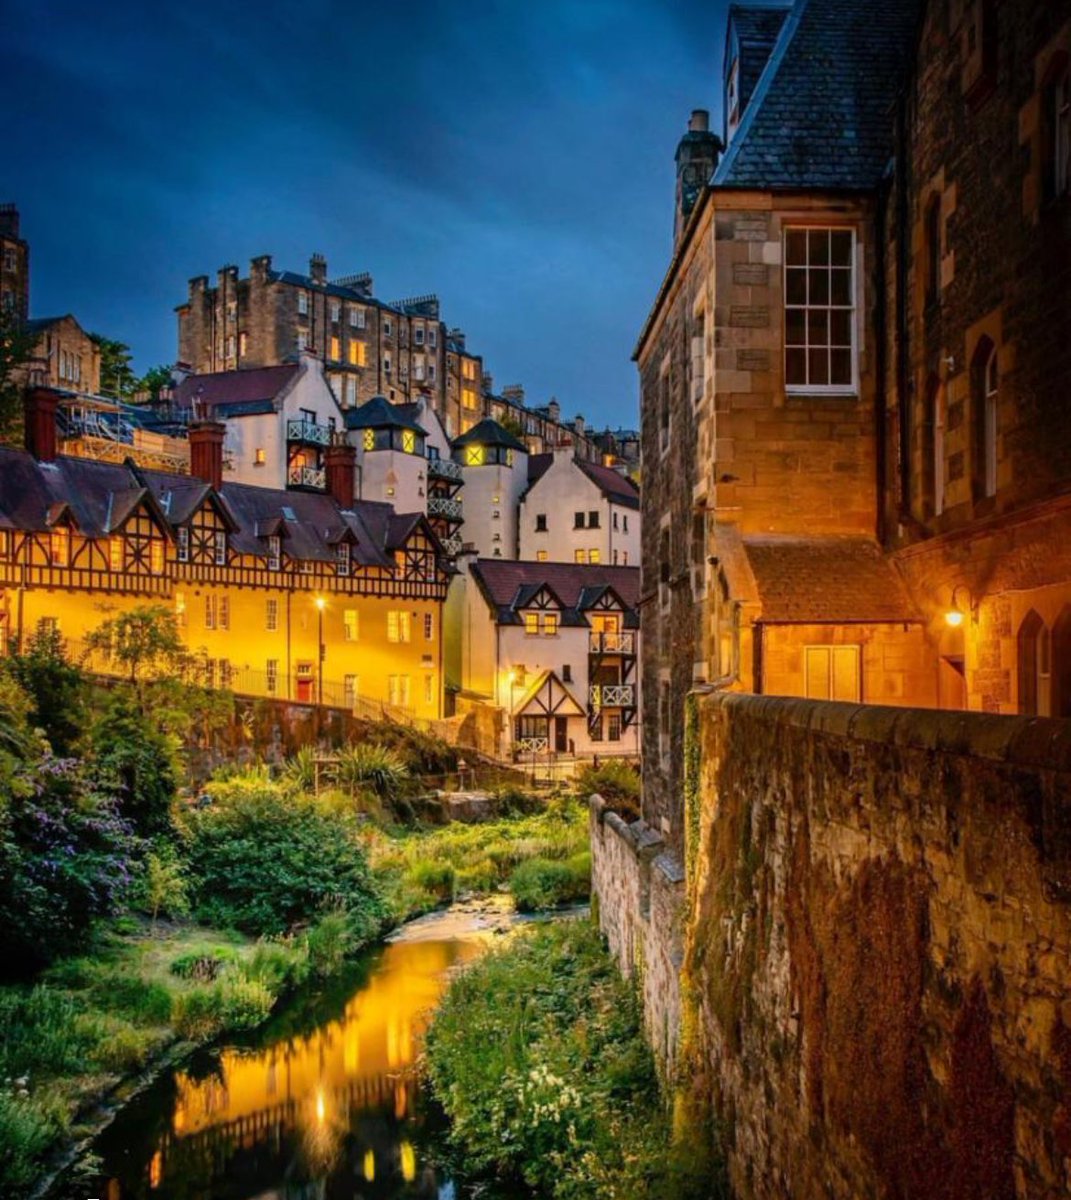 Morning, another scene I’m working on is this photograph of Dean Village. Gorgeous ay? This & my NYC commission will keep me entertained☺️🎨🇺🇸🏴󠁧󠁢󠁳󠁣󠁴󠁿 Credit to: paul_watt_photography on instagram, he also captured The Bow Bar too. Very talented.📸 #edinburgh #scotland